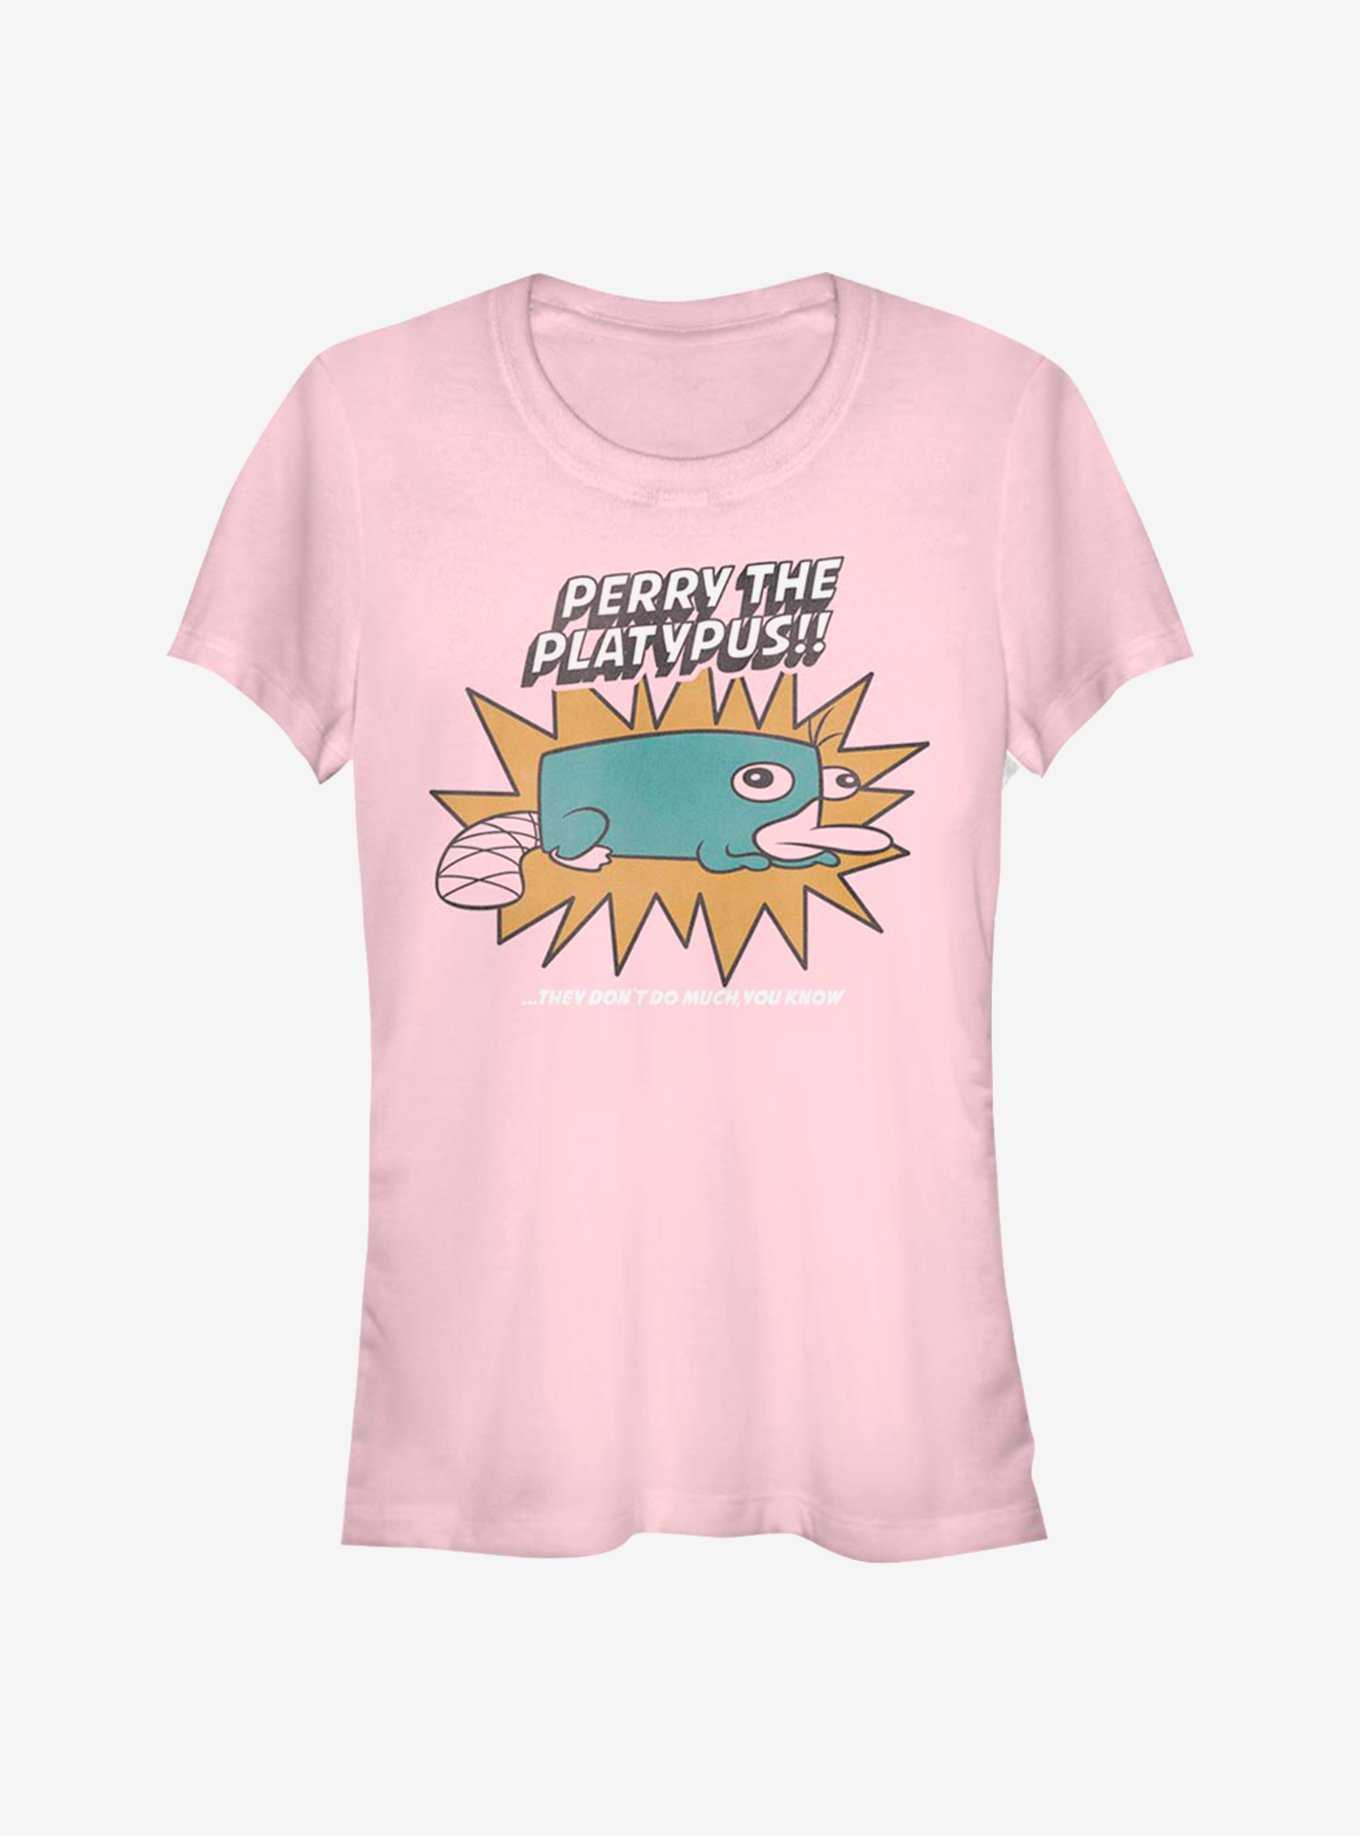 Disney Phineas And Ferb Perry The Platypus Girls T-Shirt, , hi-res